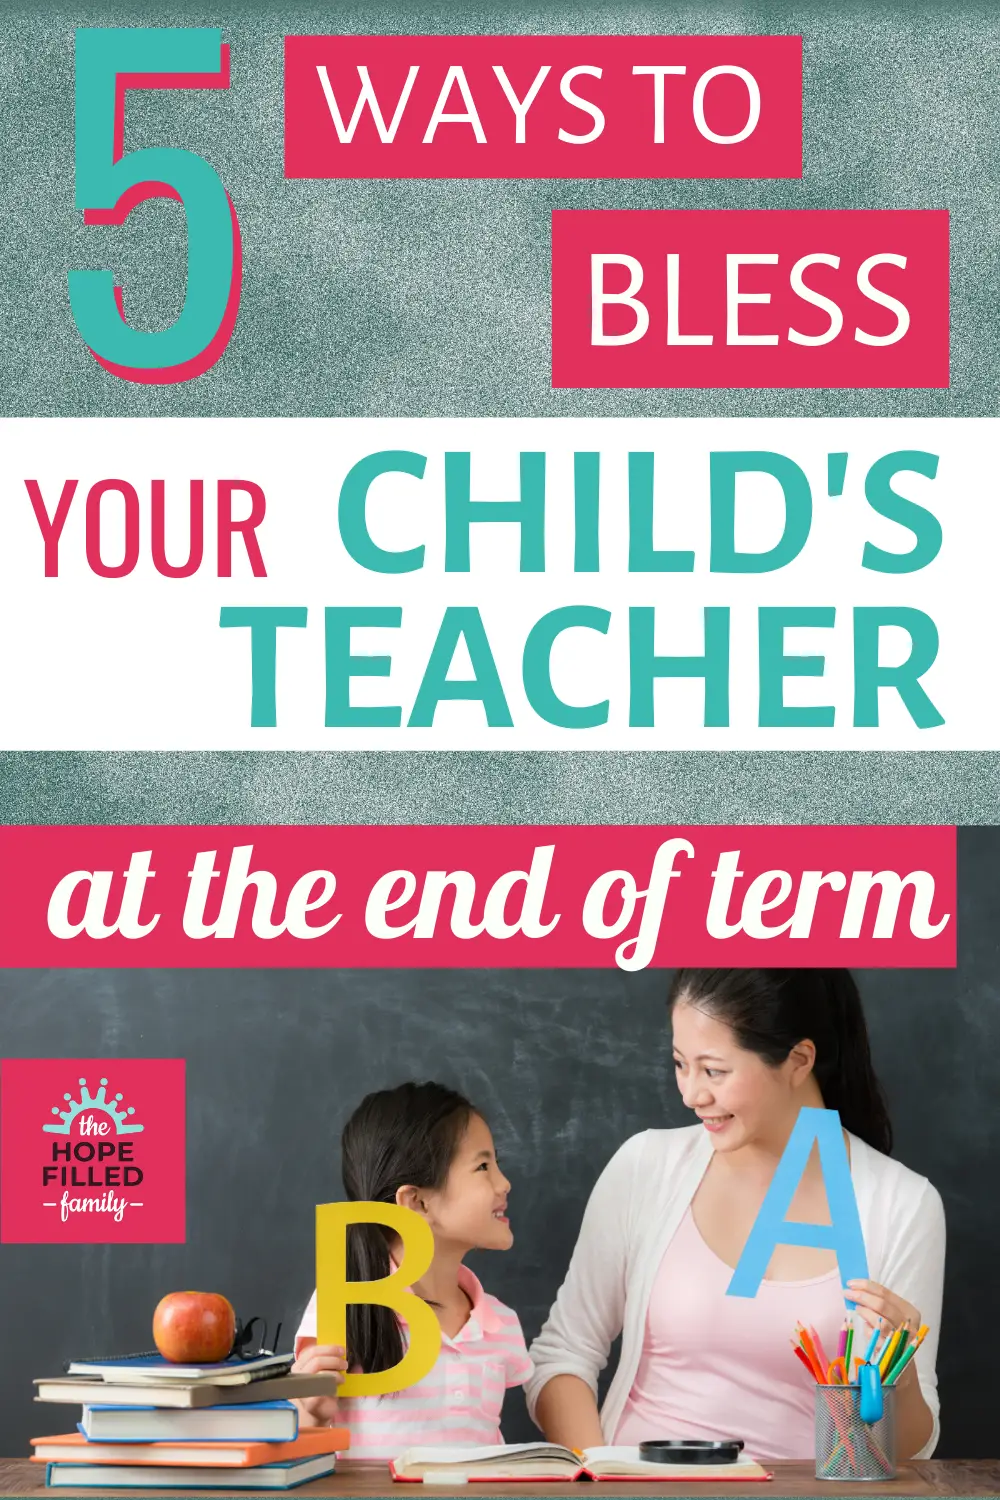 How can I support my child's teacher at the end of term? What should I give my child's teacher?